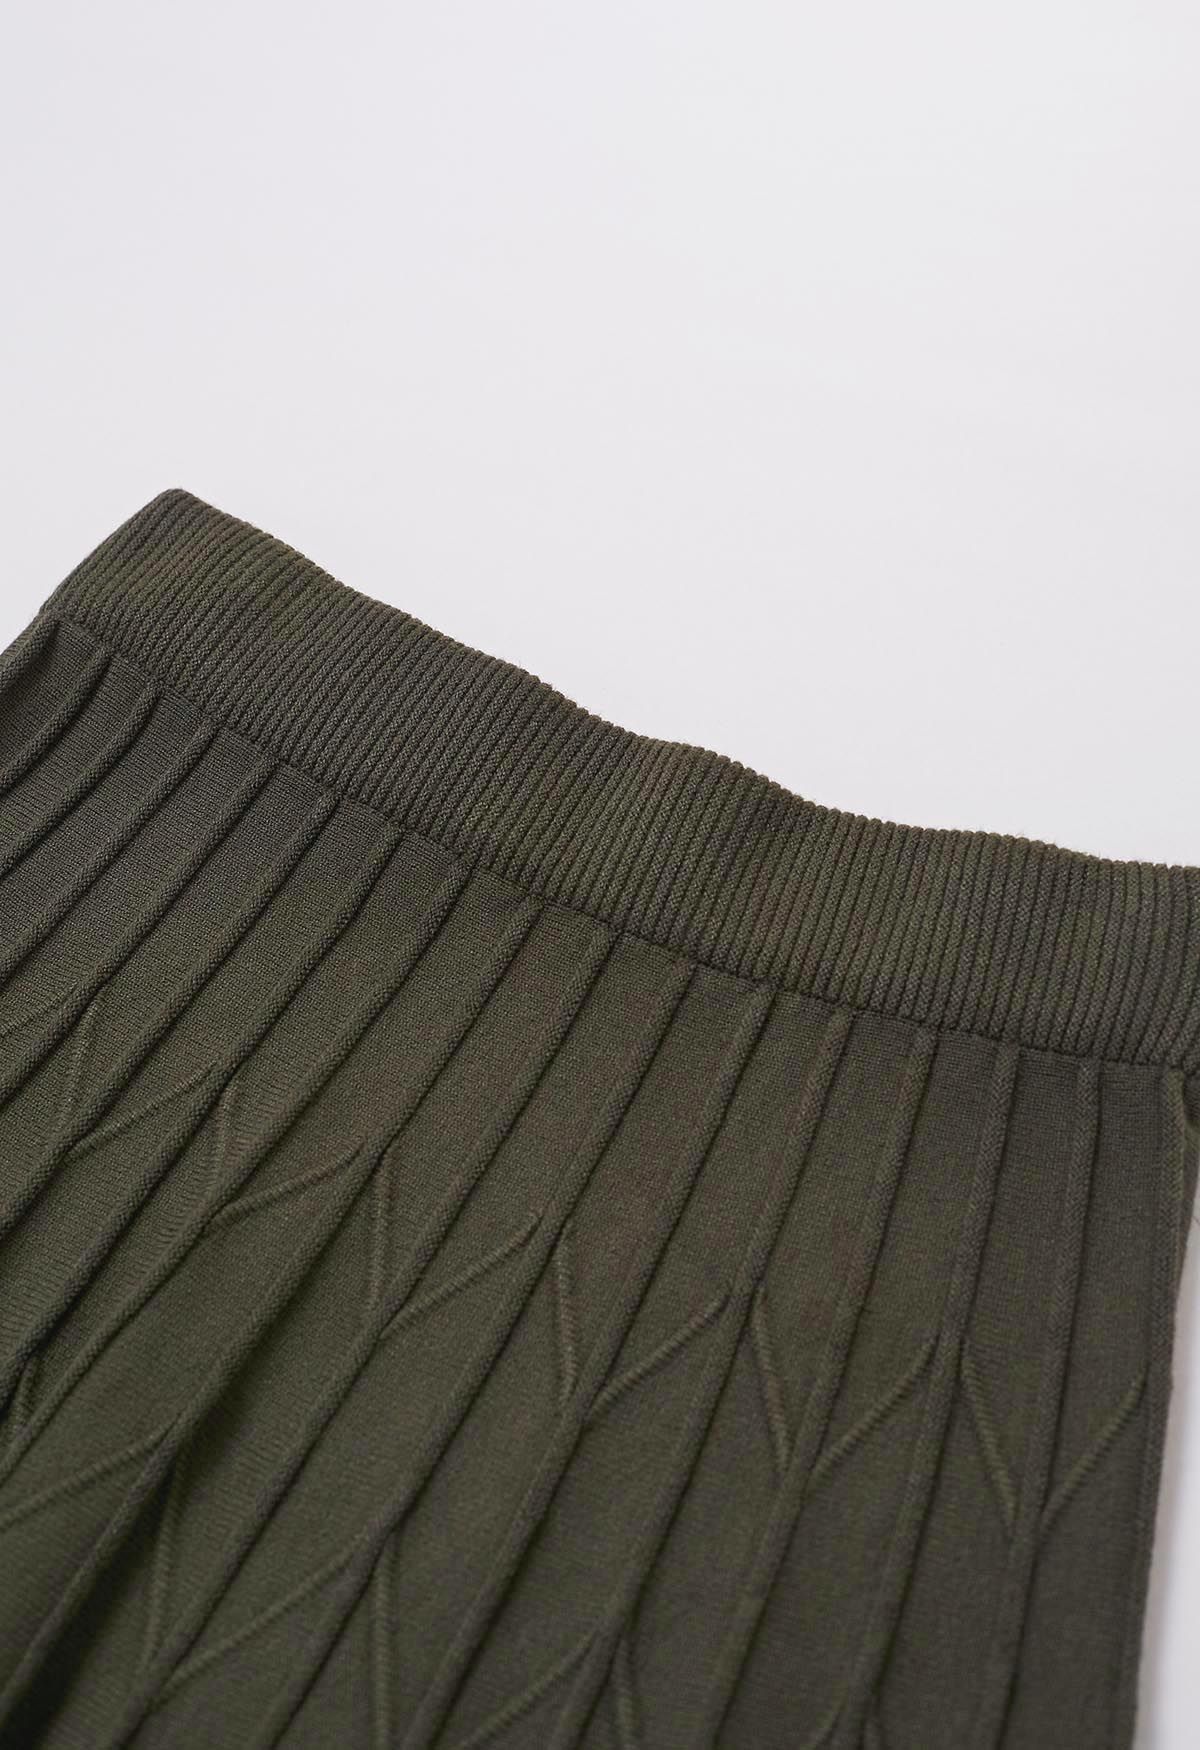 Zigzag Pleated Knit Skirt in Army Green